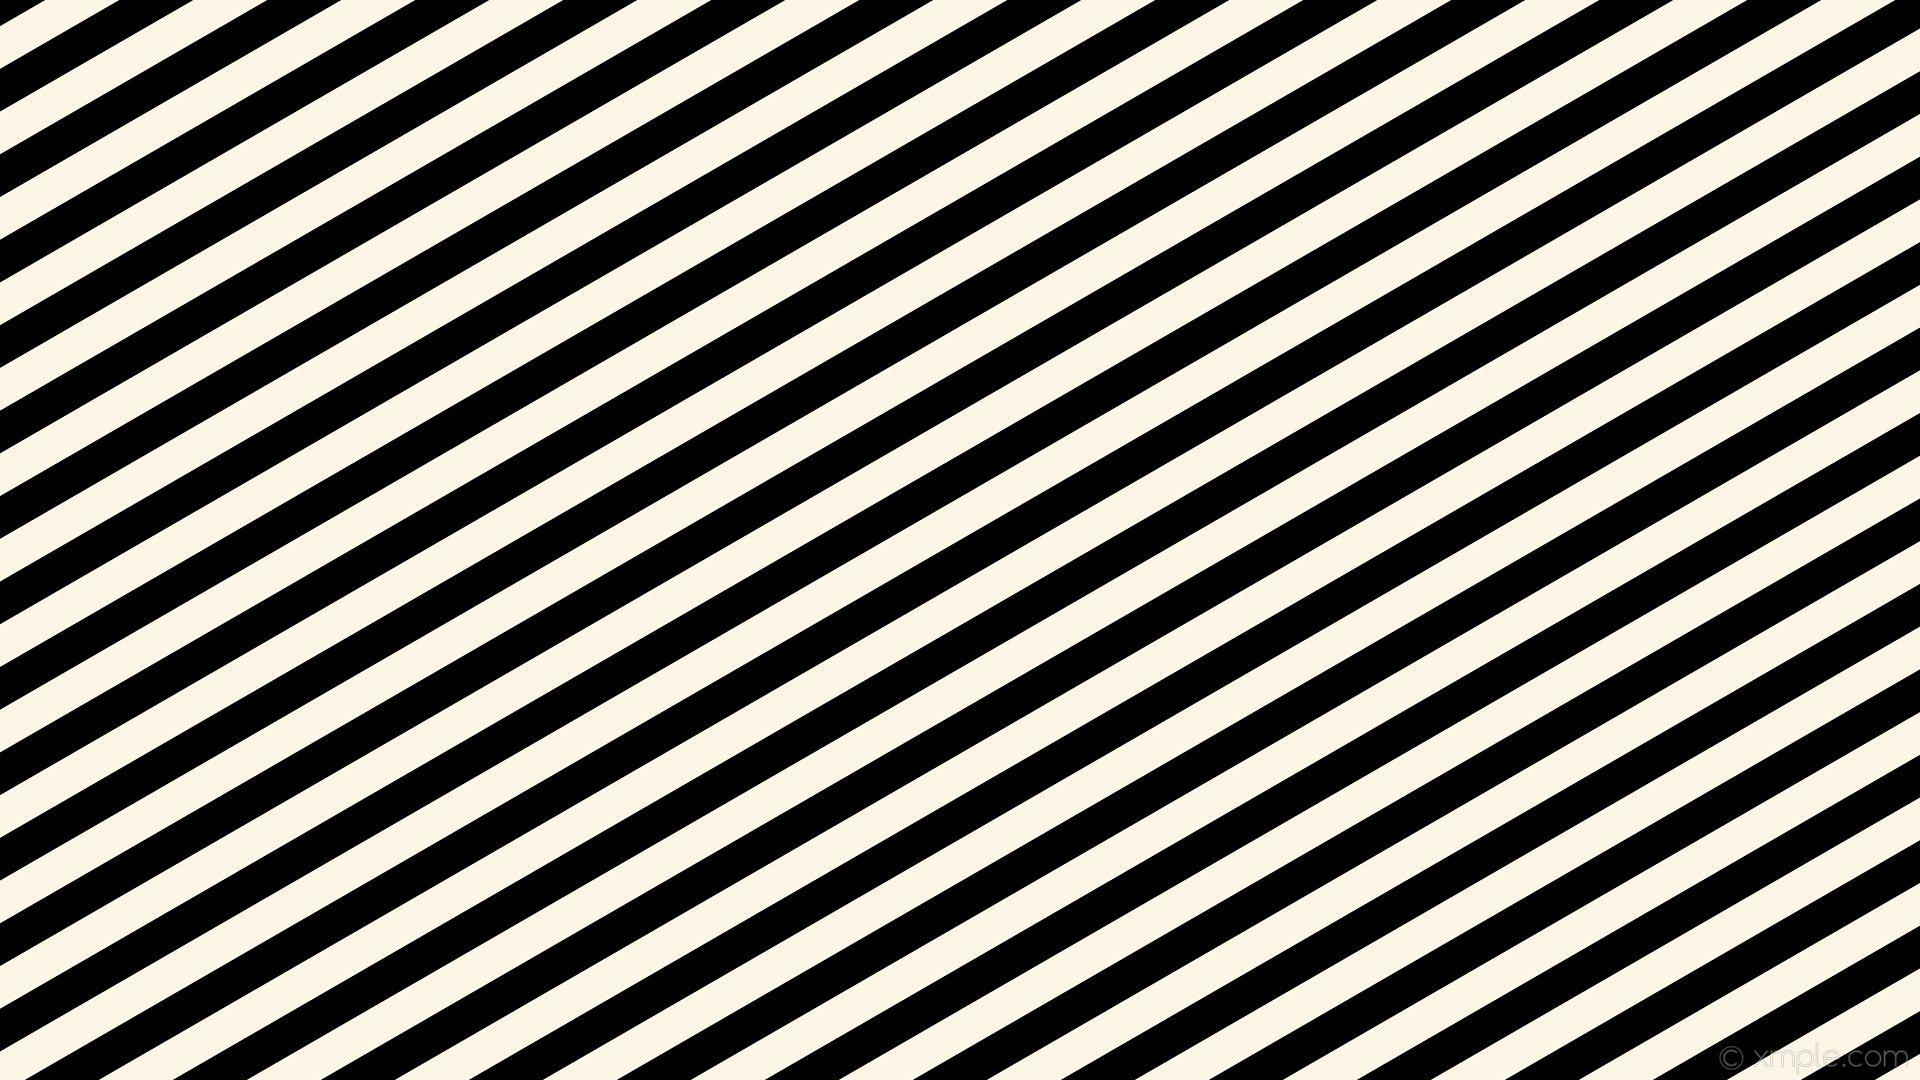 Black and White Diagonal Line Wallpapers - Top Free Black and White ...